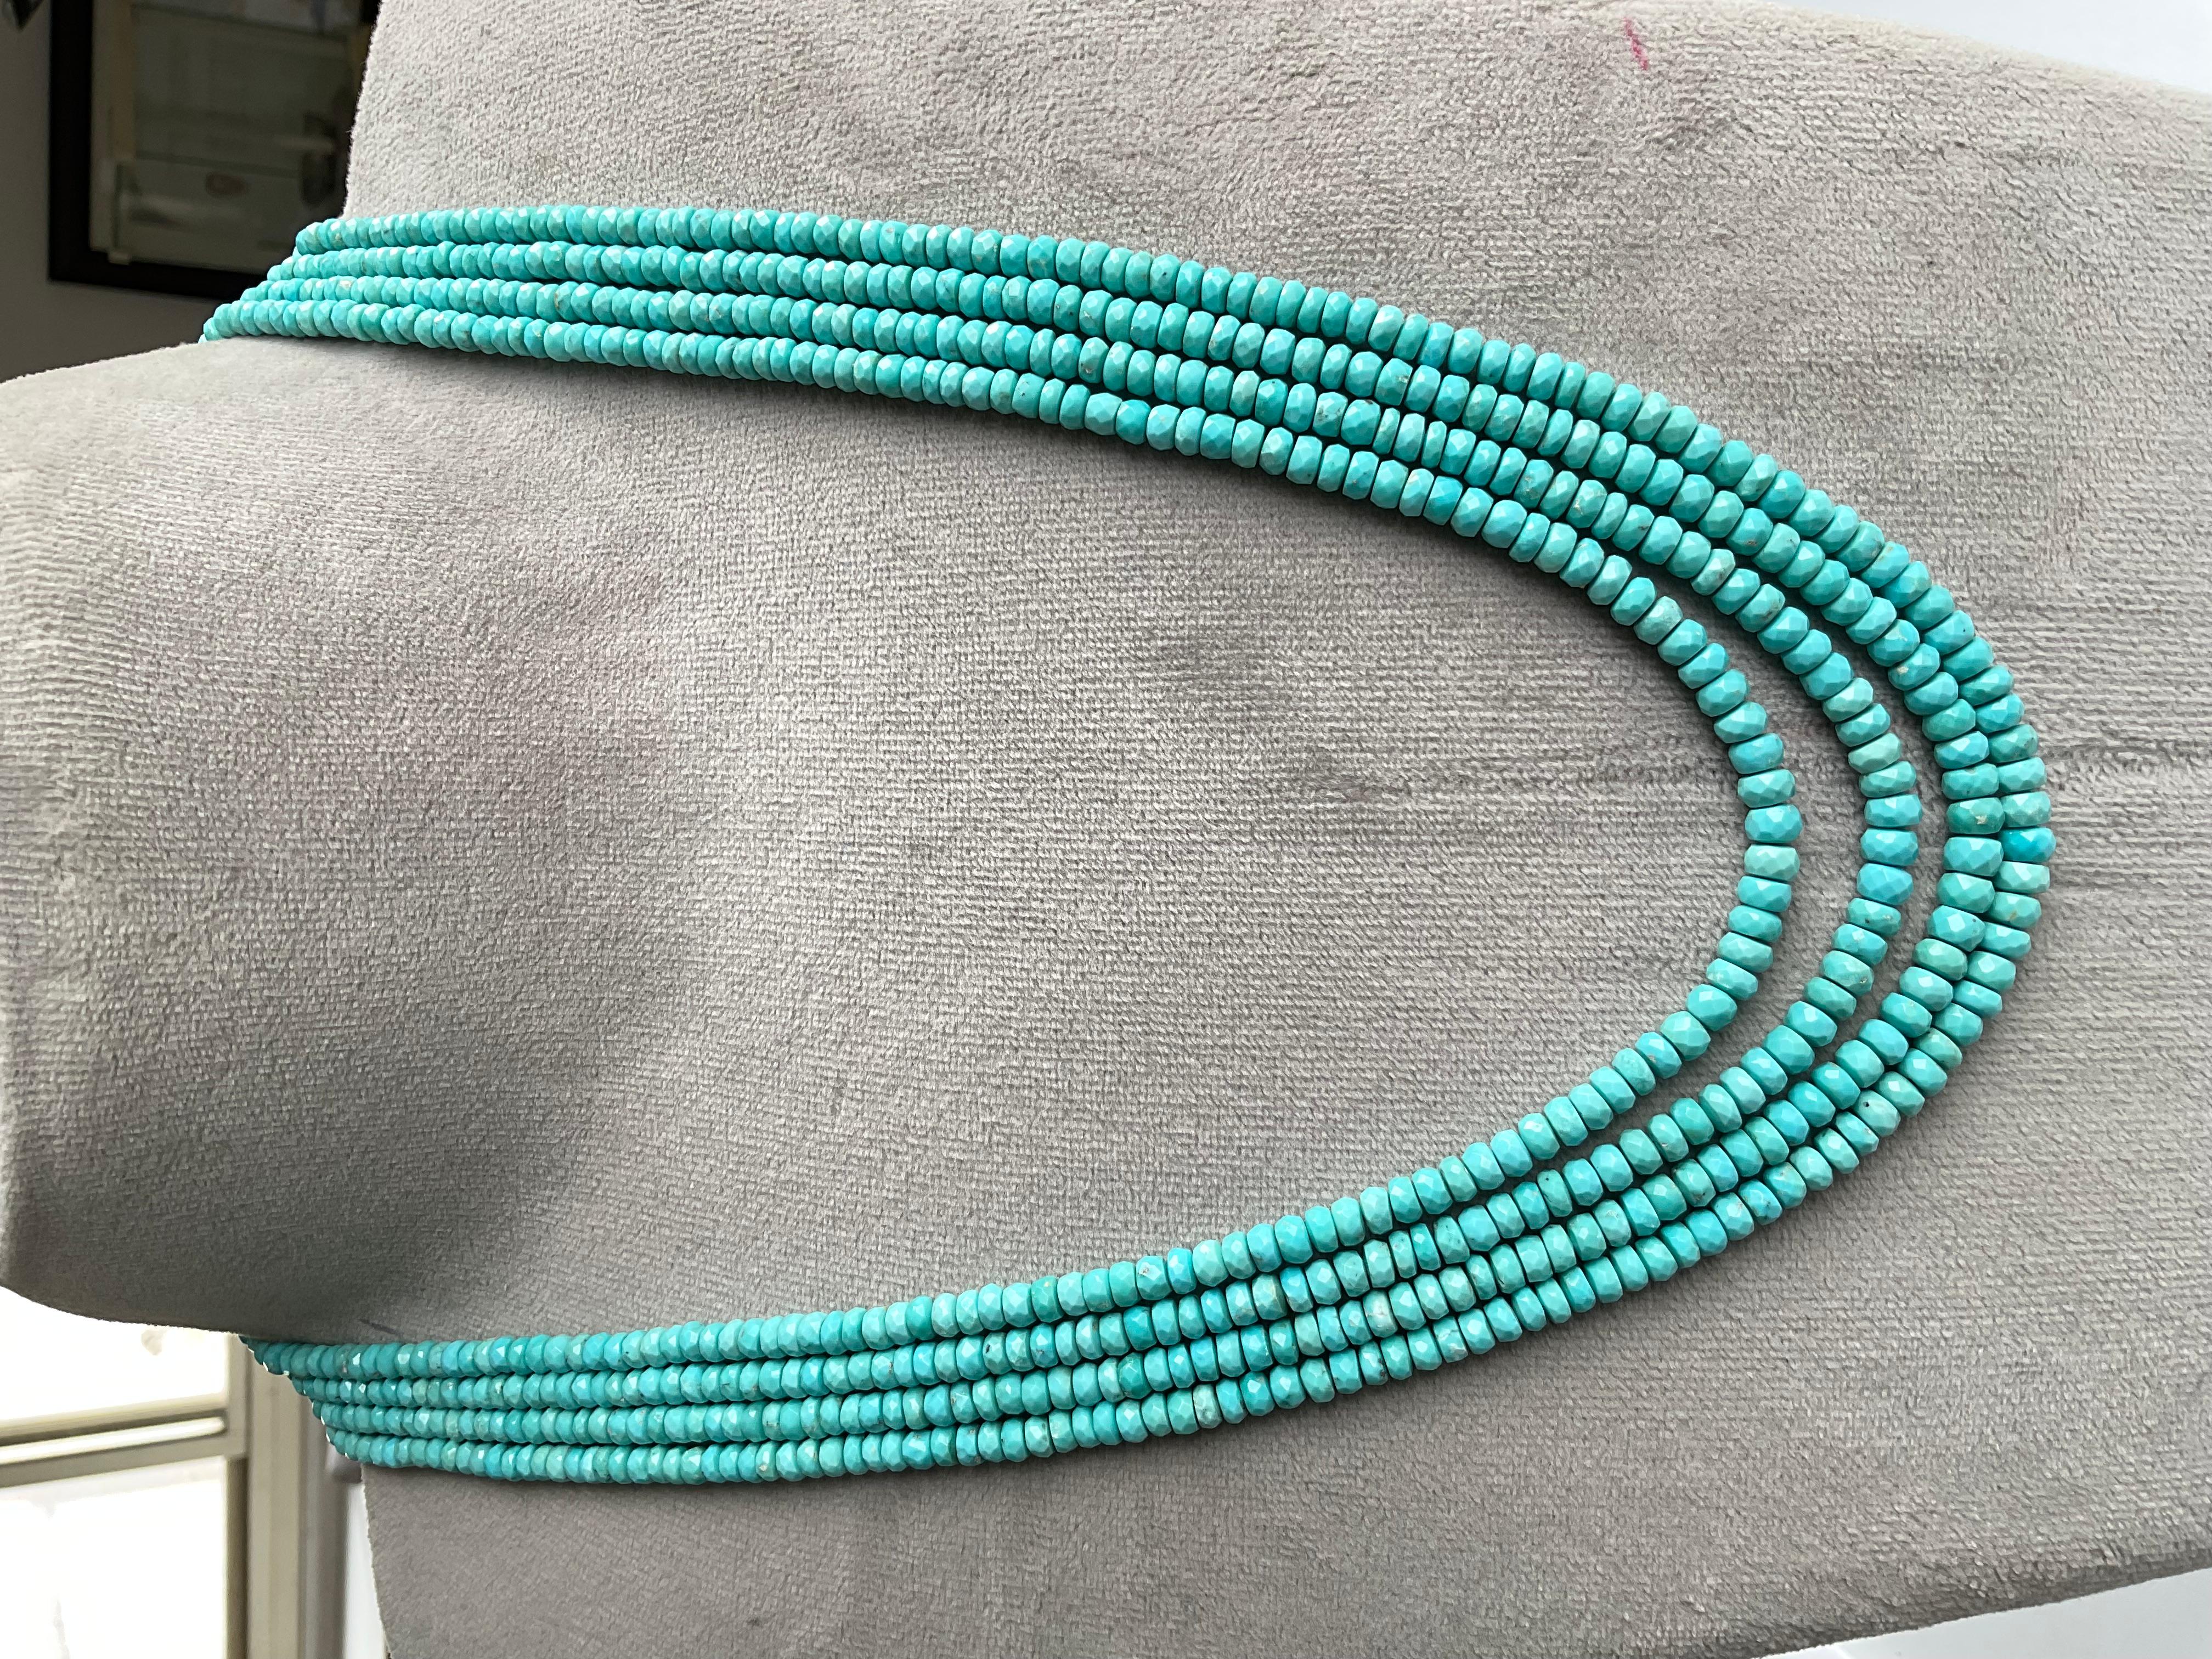 Turquoise Beaded Faceted Necklace For Jewelry Top Quality Gemstone

Gemstone : Turquoise Gemstone
Size: 4x5 MM
Weight: 273.62 Carats
Shape: Beads
Strand - 4 
